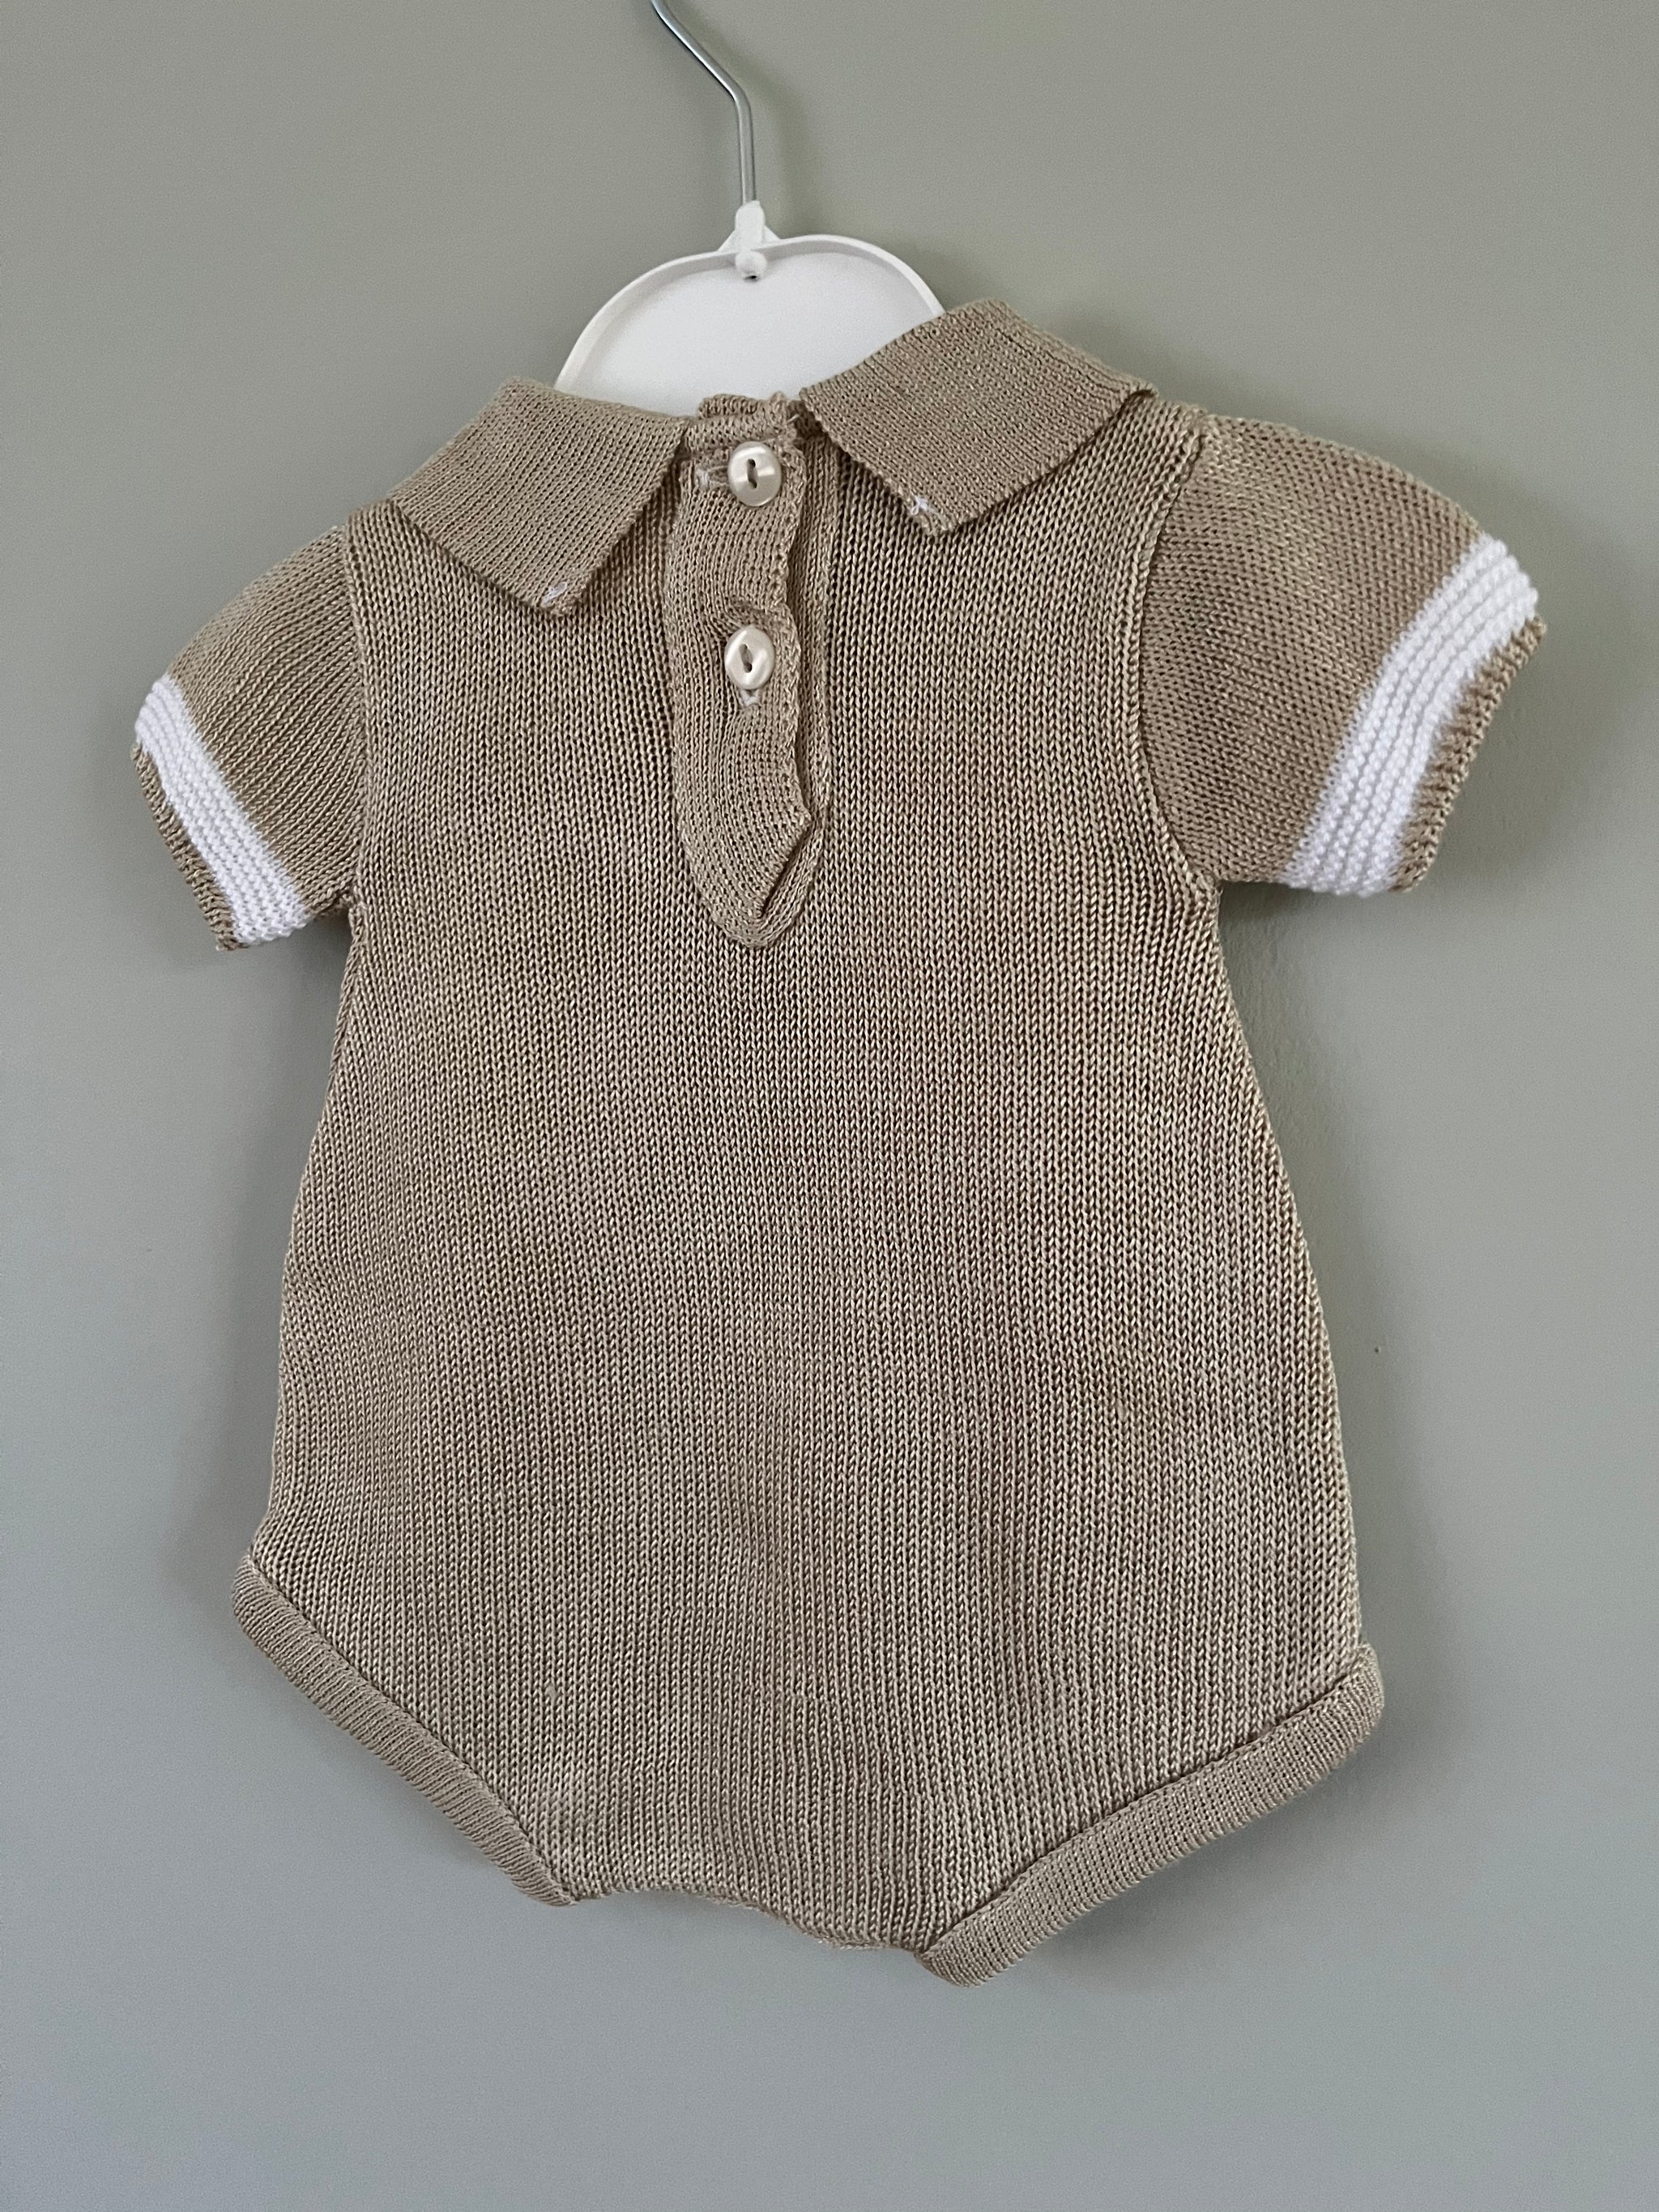 Baby Beige Knitted Romper Outfit Little Nosh